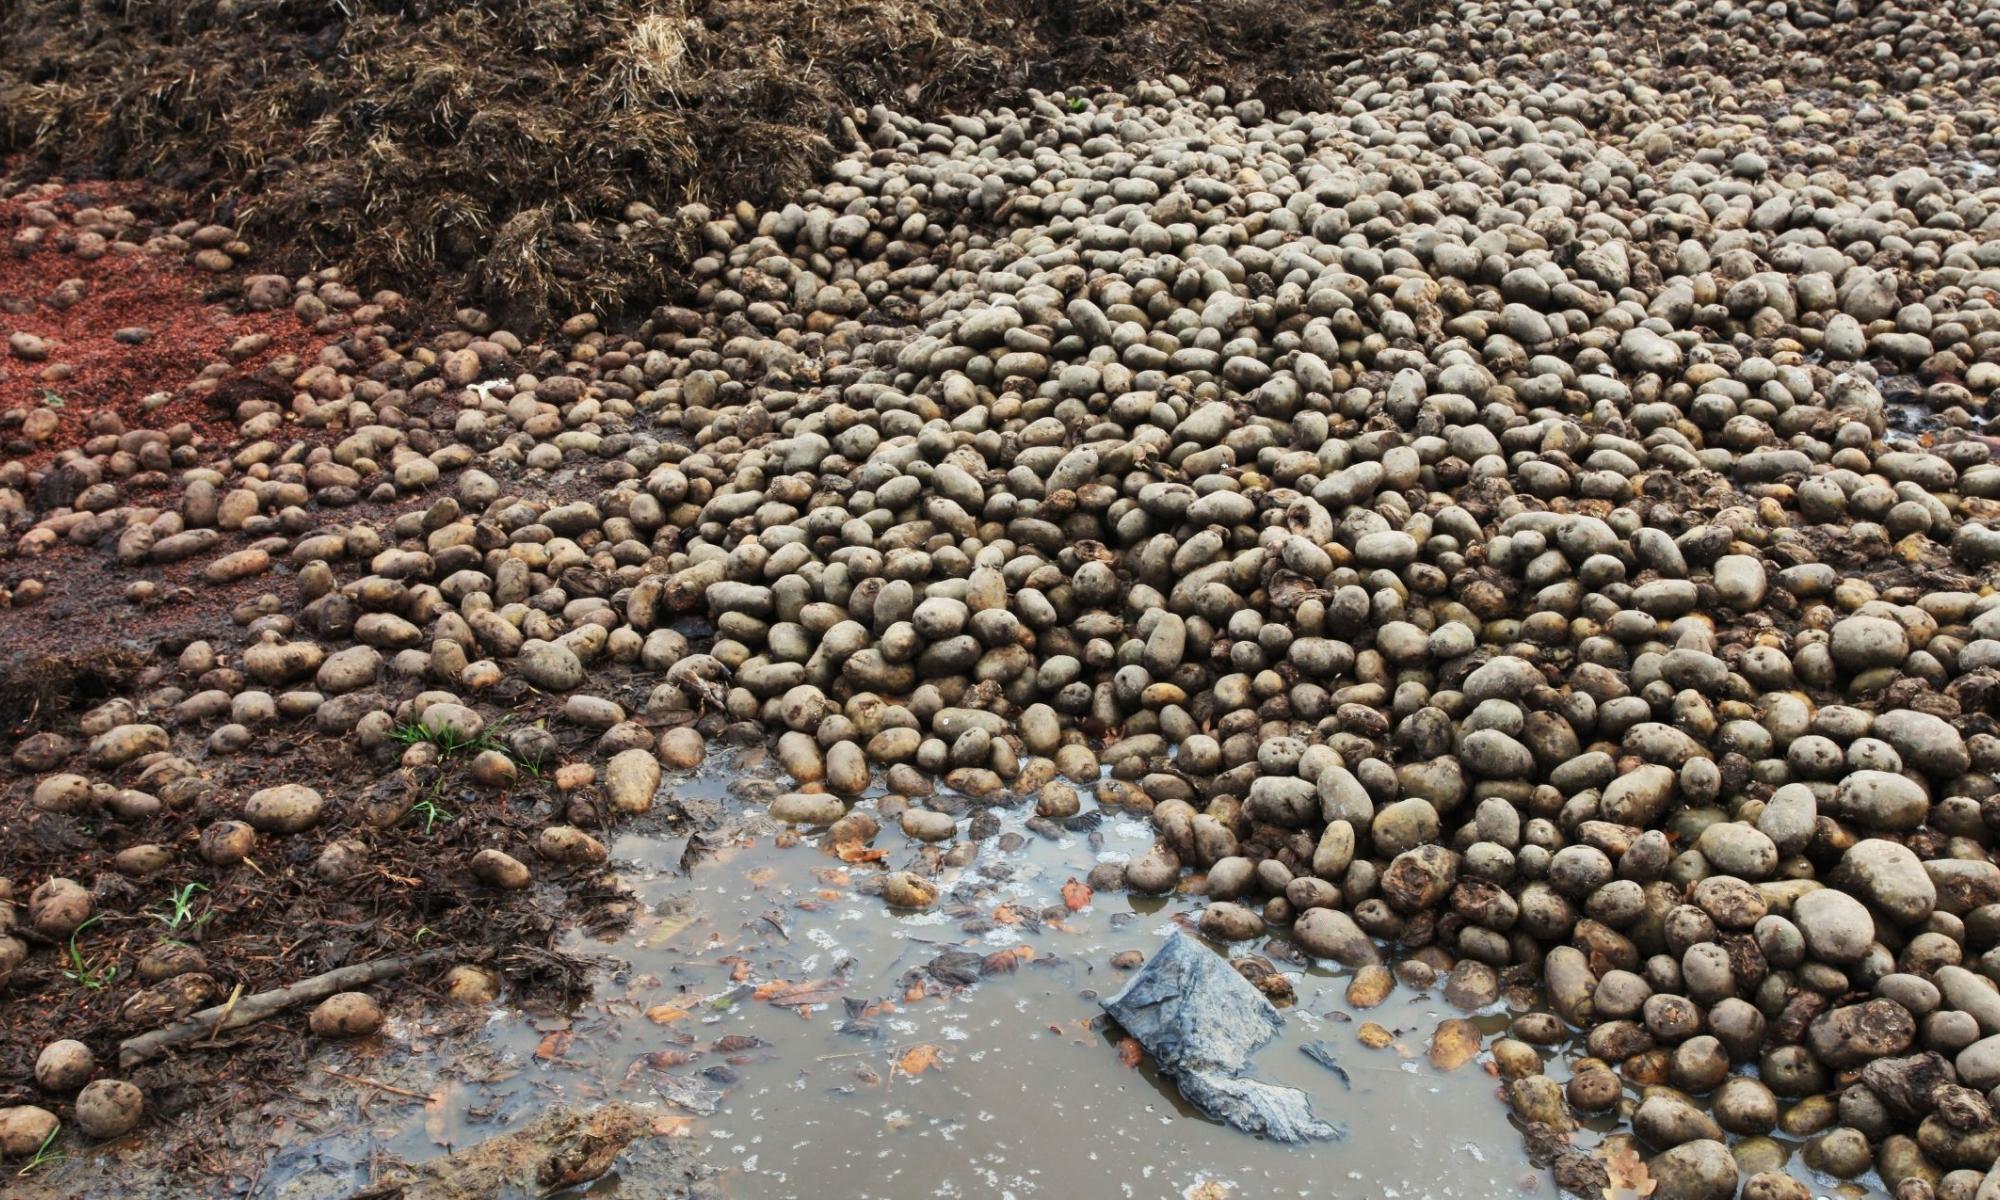 Piles of waste potatoes